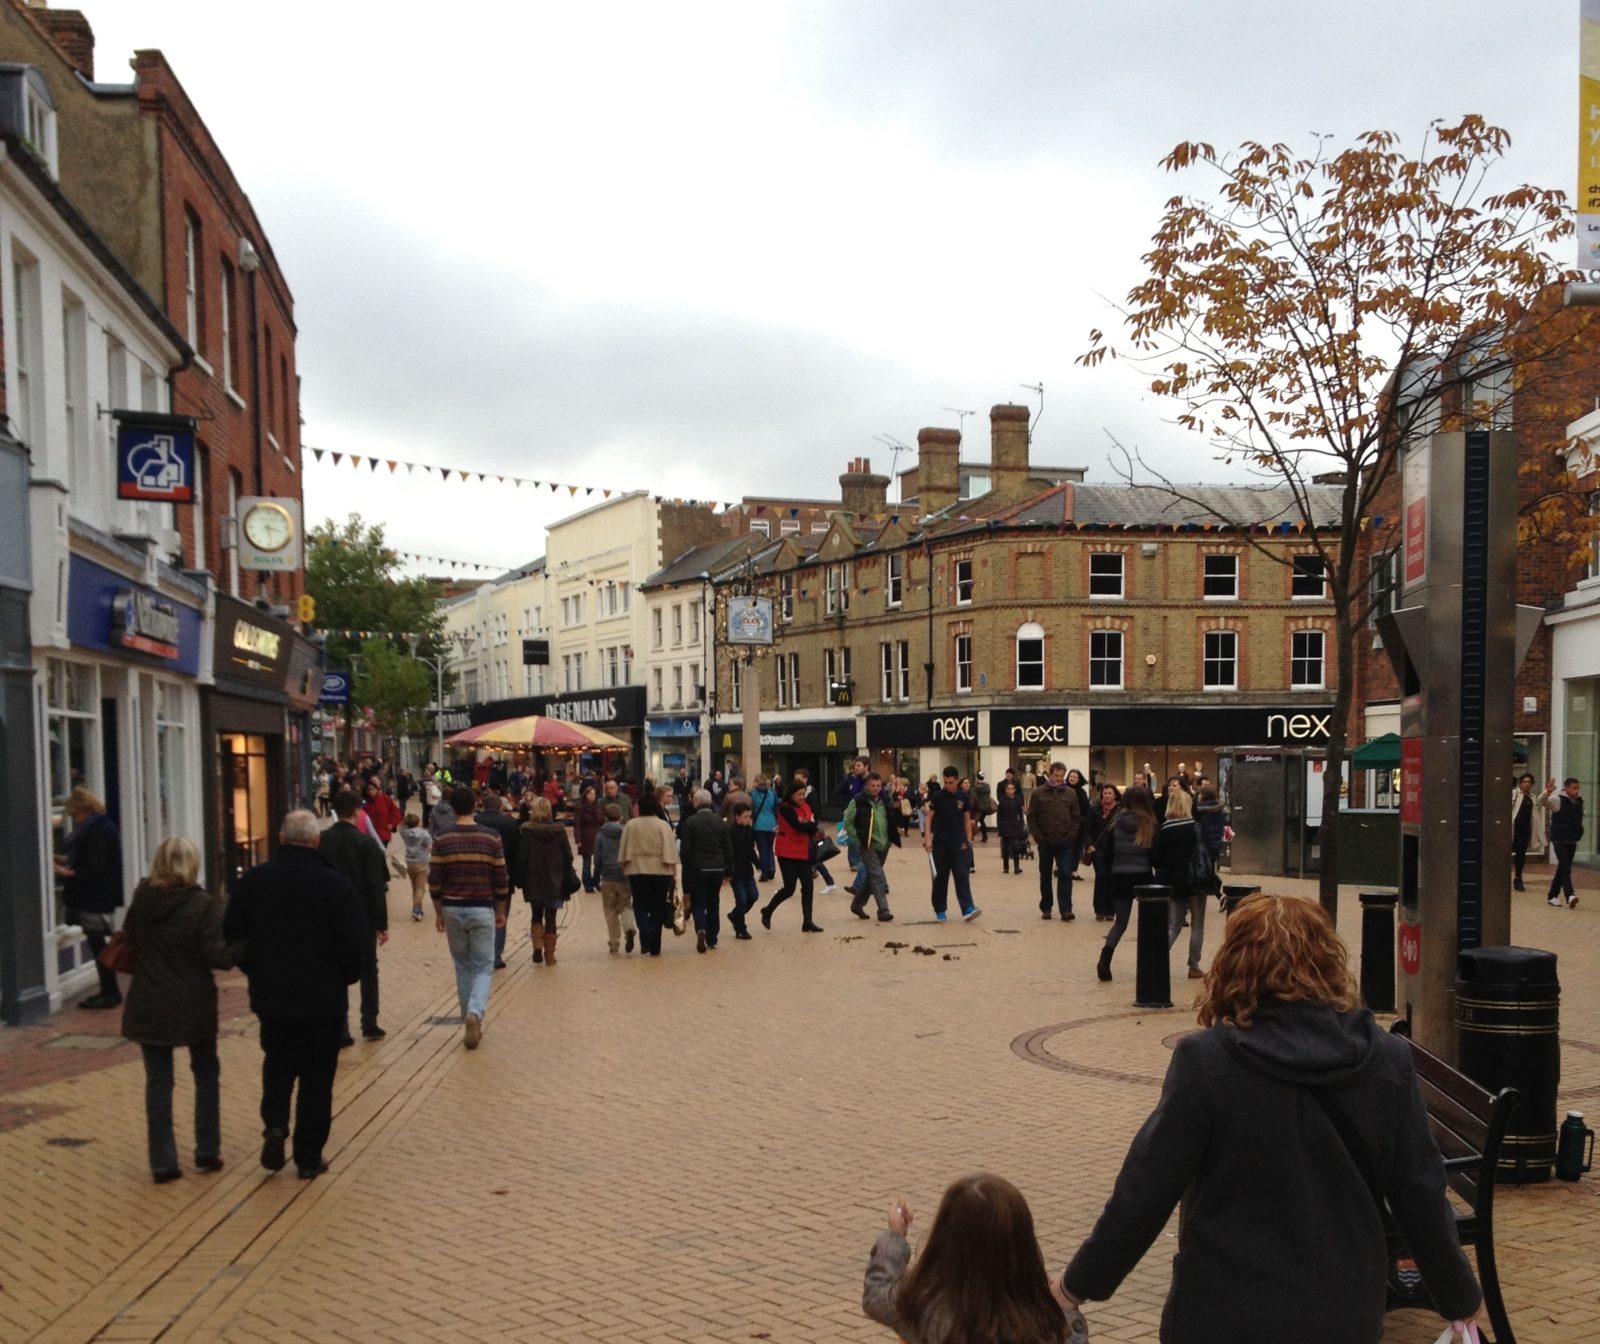 Chelmsford High Street, crying out for investment from the council.